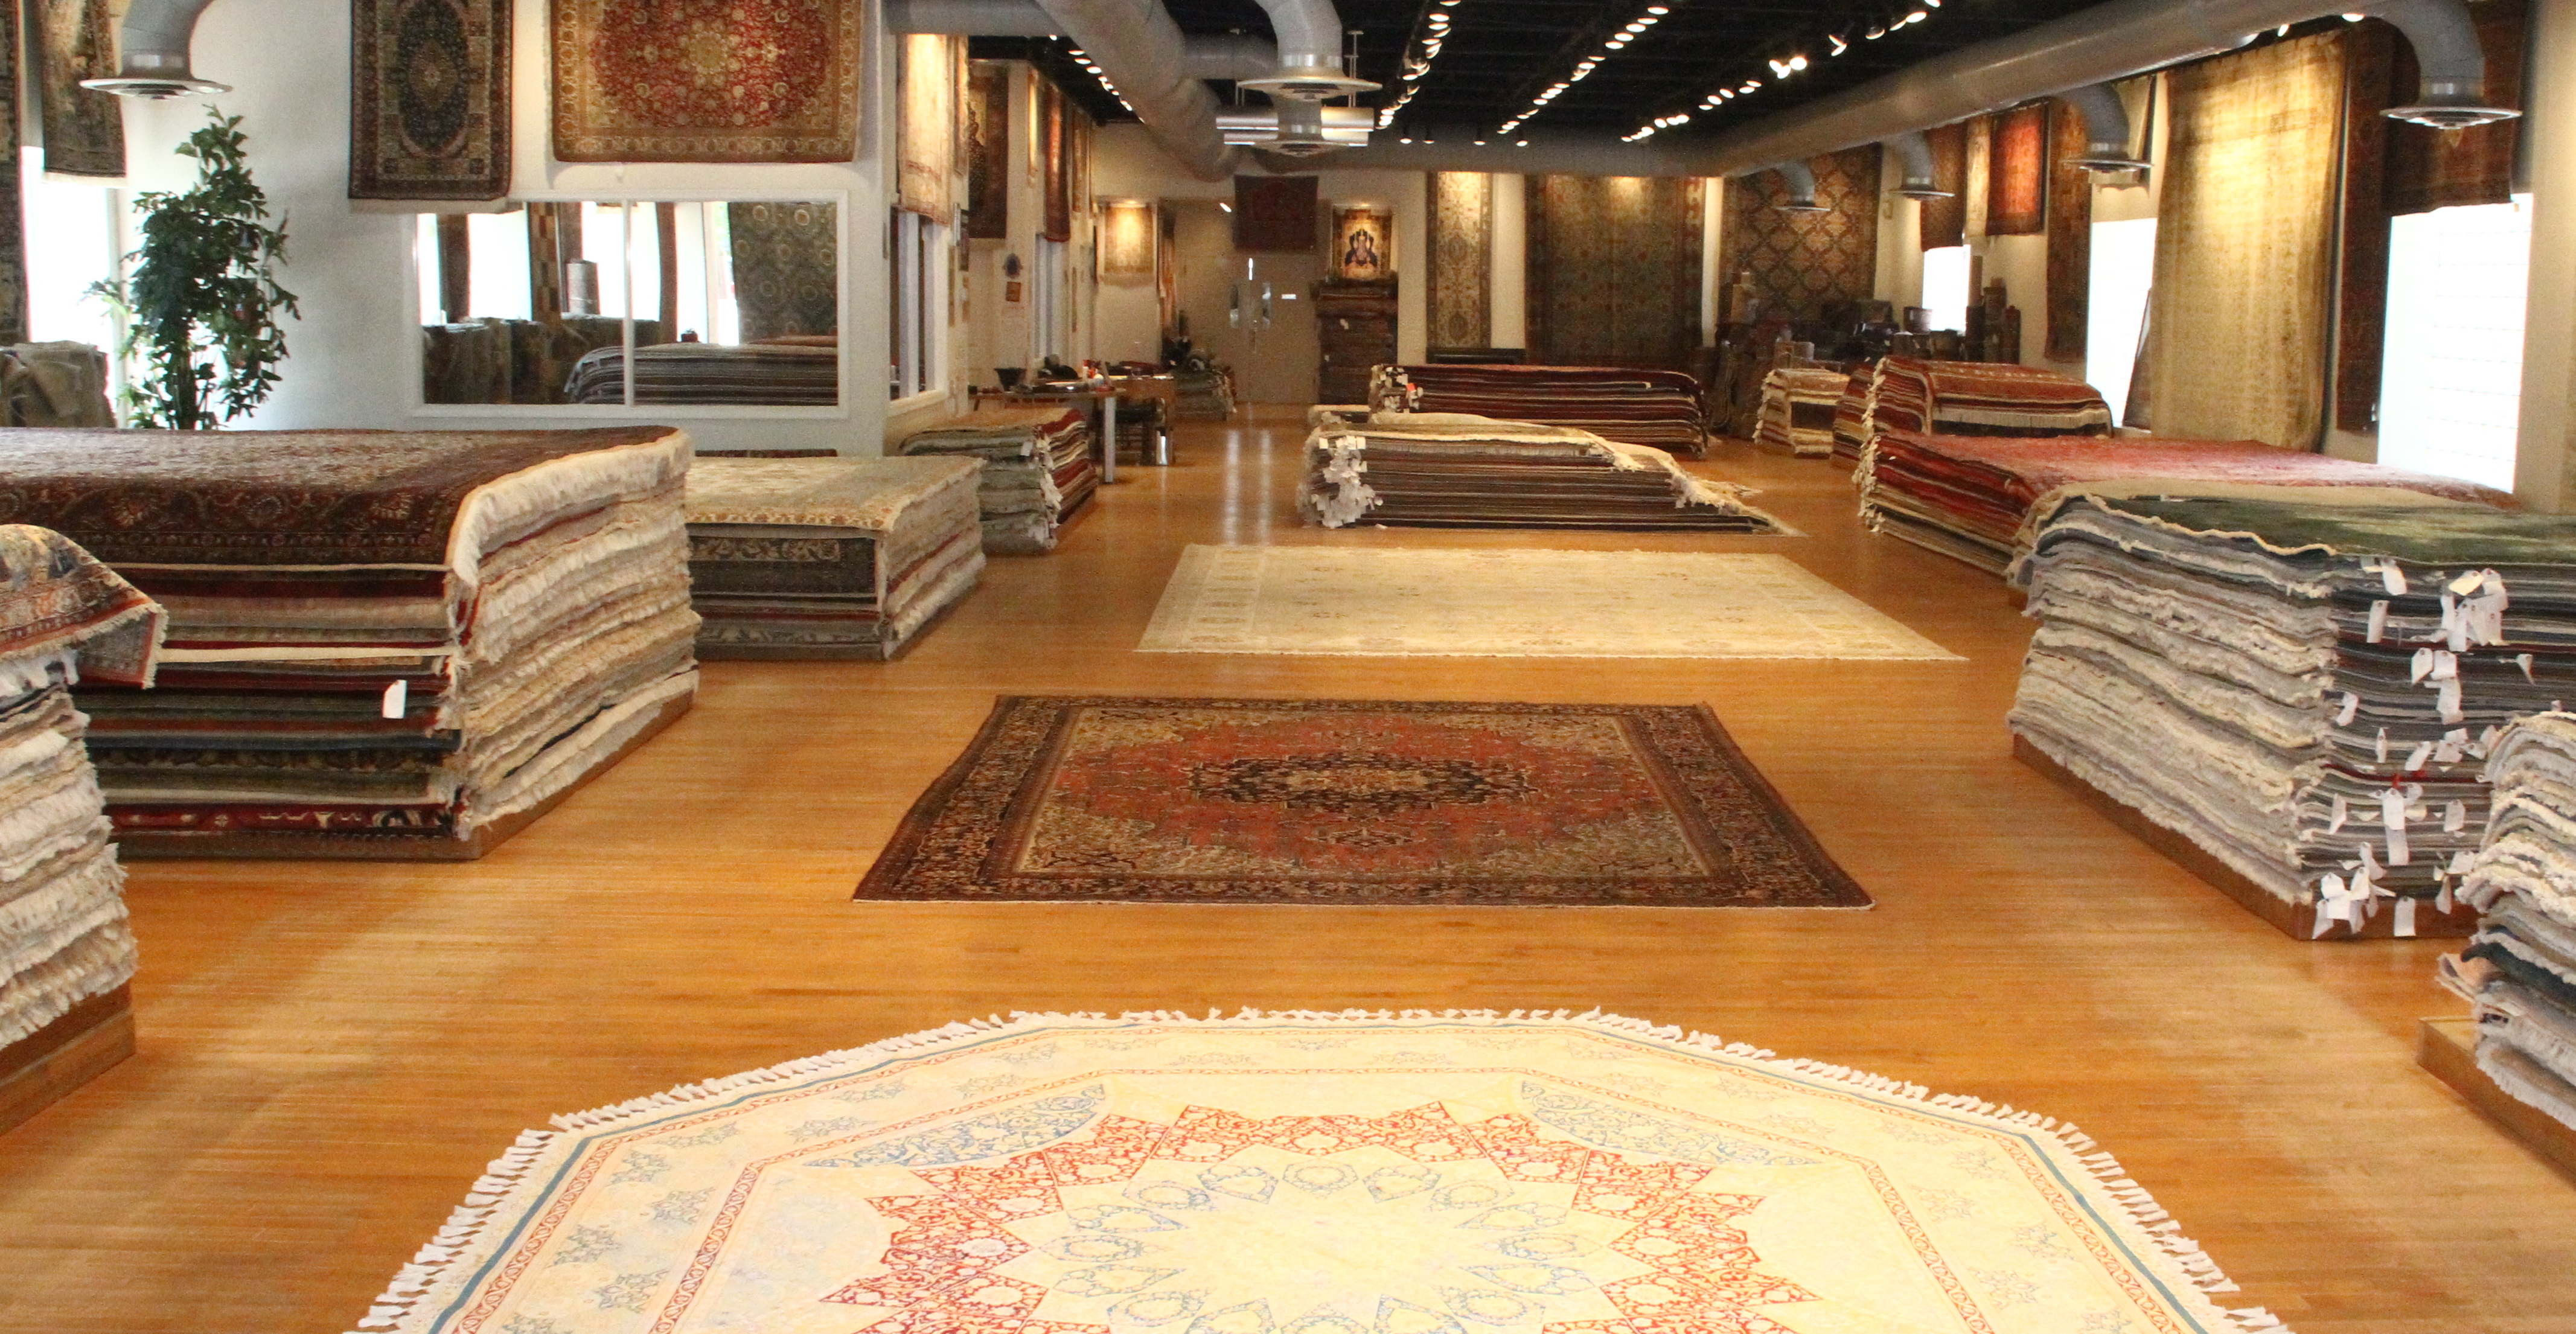 Can You Have Valuable Oriental Rugs if You Have Pets?